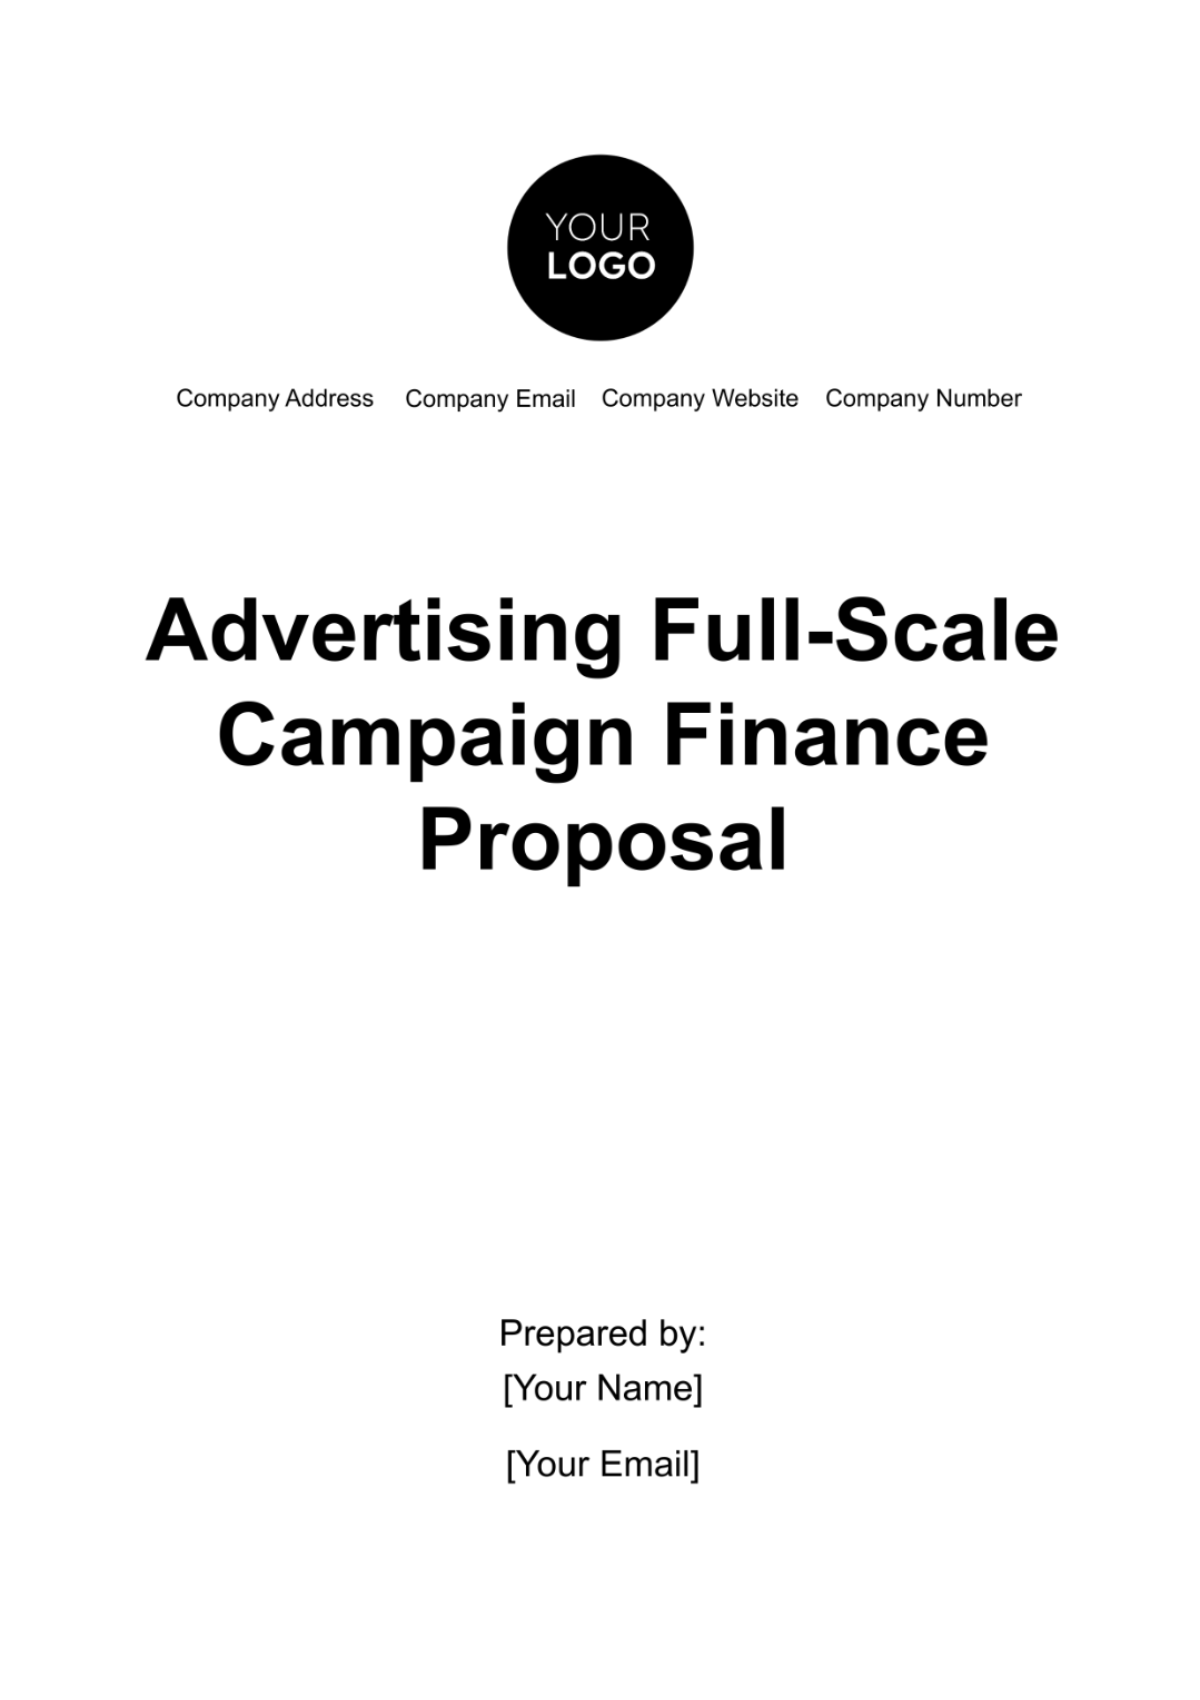 Advertising Full-Scale Campaign Finance Proposal Template